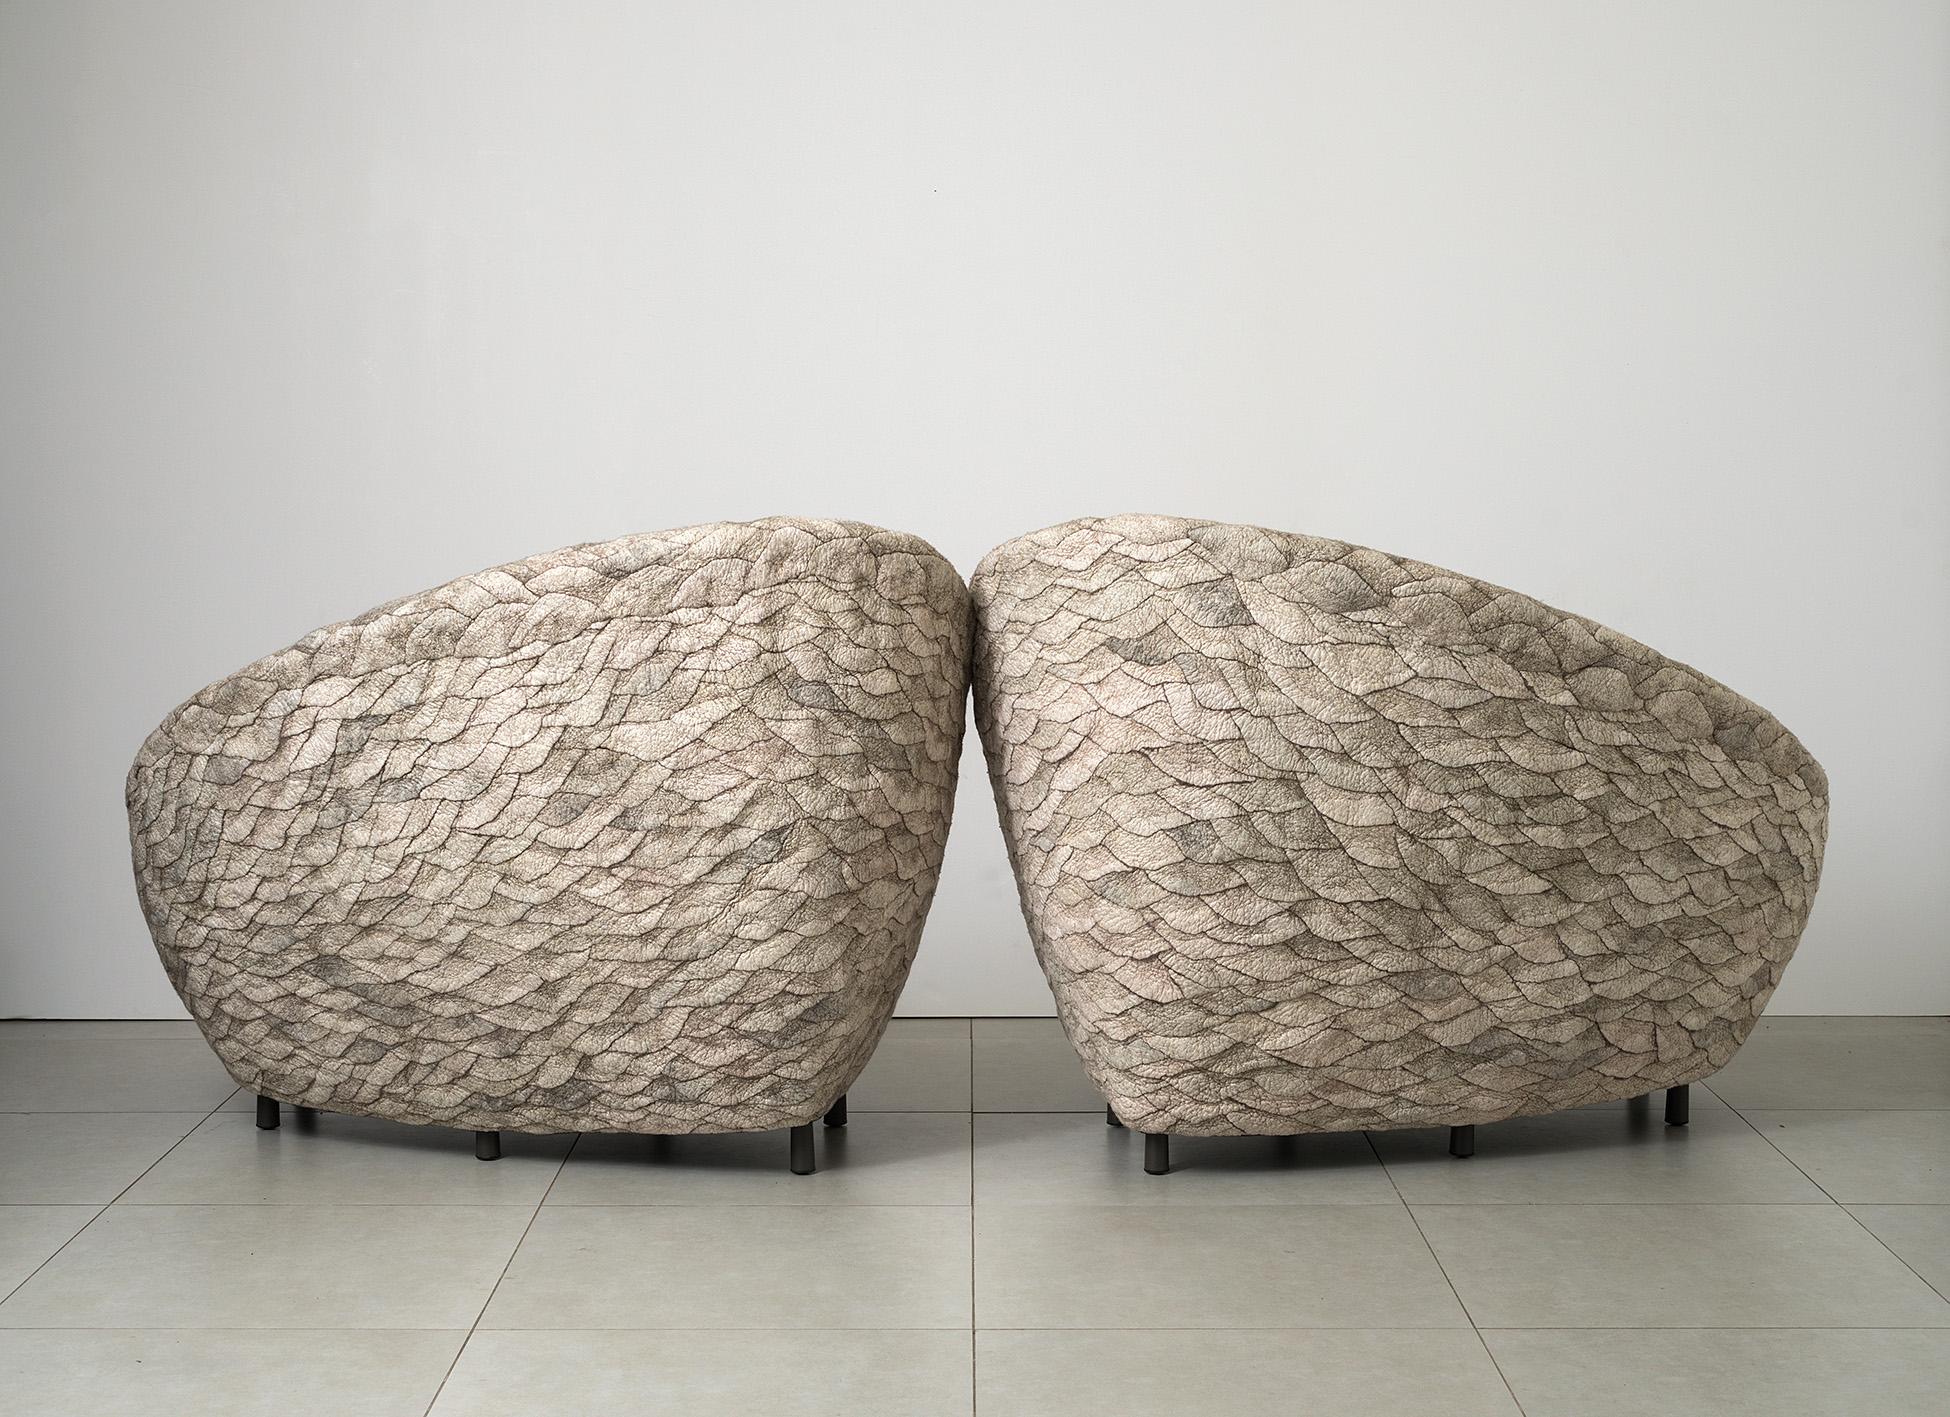 Contemporary Ayala Serfaty, Rapa Series: Conchas, Armchairs with Shared Ottoman, Israel, 2020 For Sale